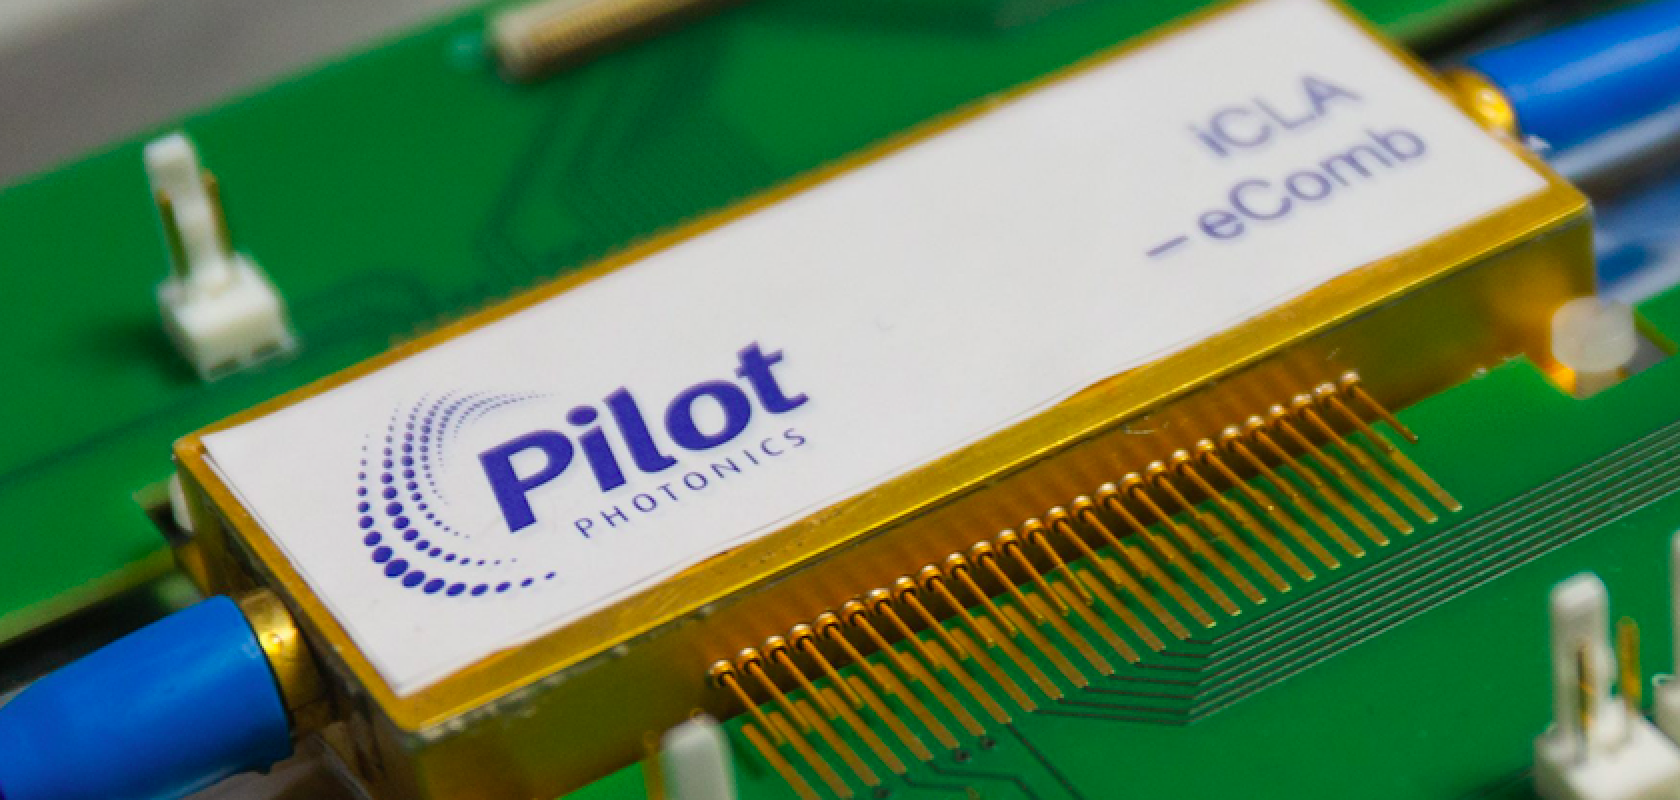 Pilot Photonics has secured funding from the European Innovation Council, which will help to drive forward its key technology blocks. (Image: LED Professional) 